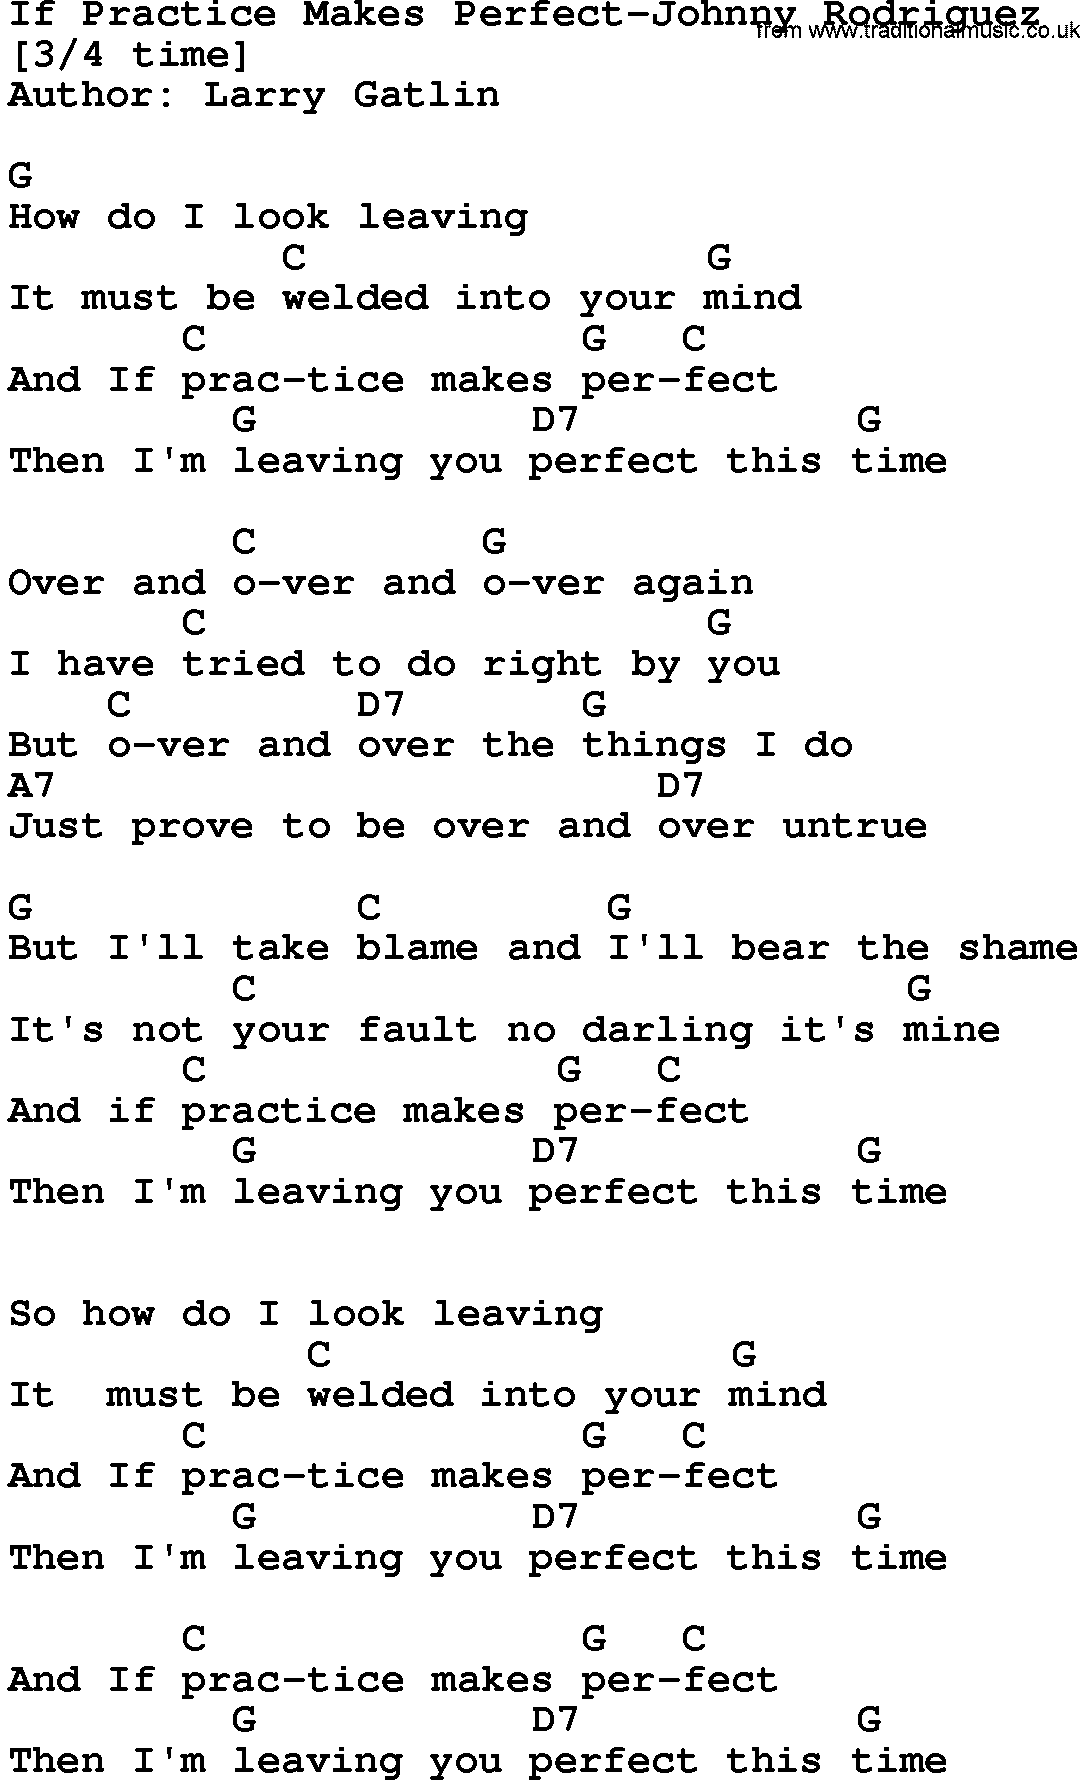 Country music song: If Practice Makes Perfect-Johnny Rodriguez lyrics and chords